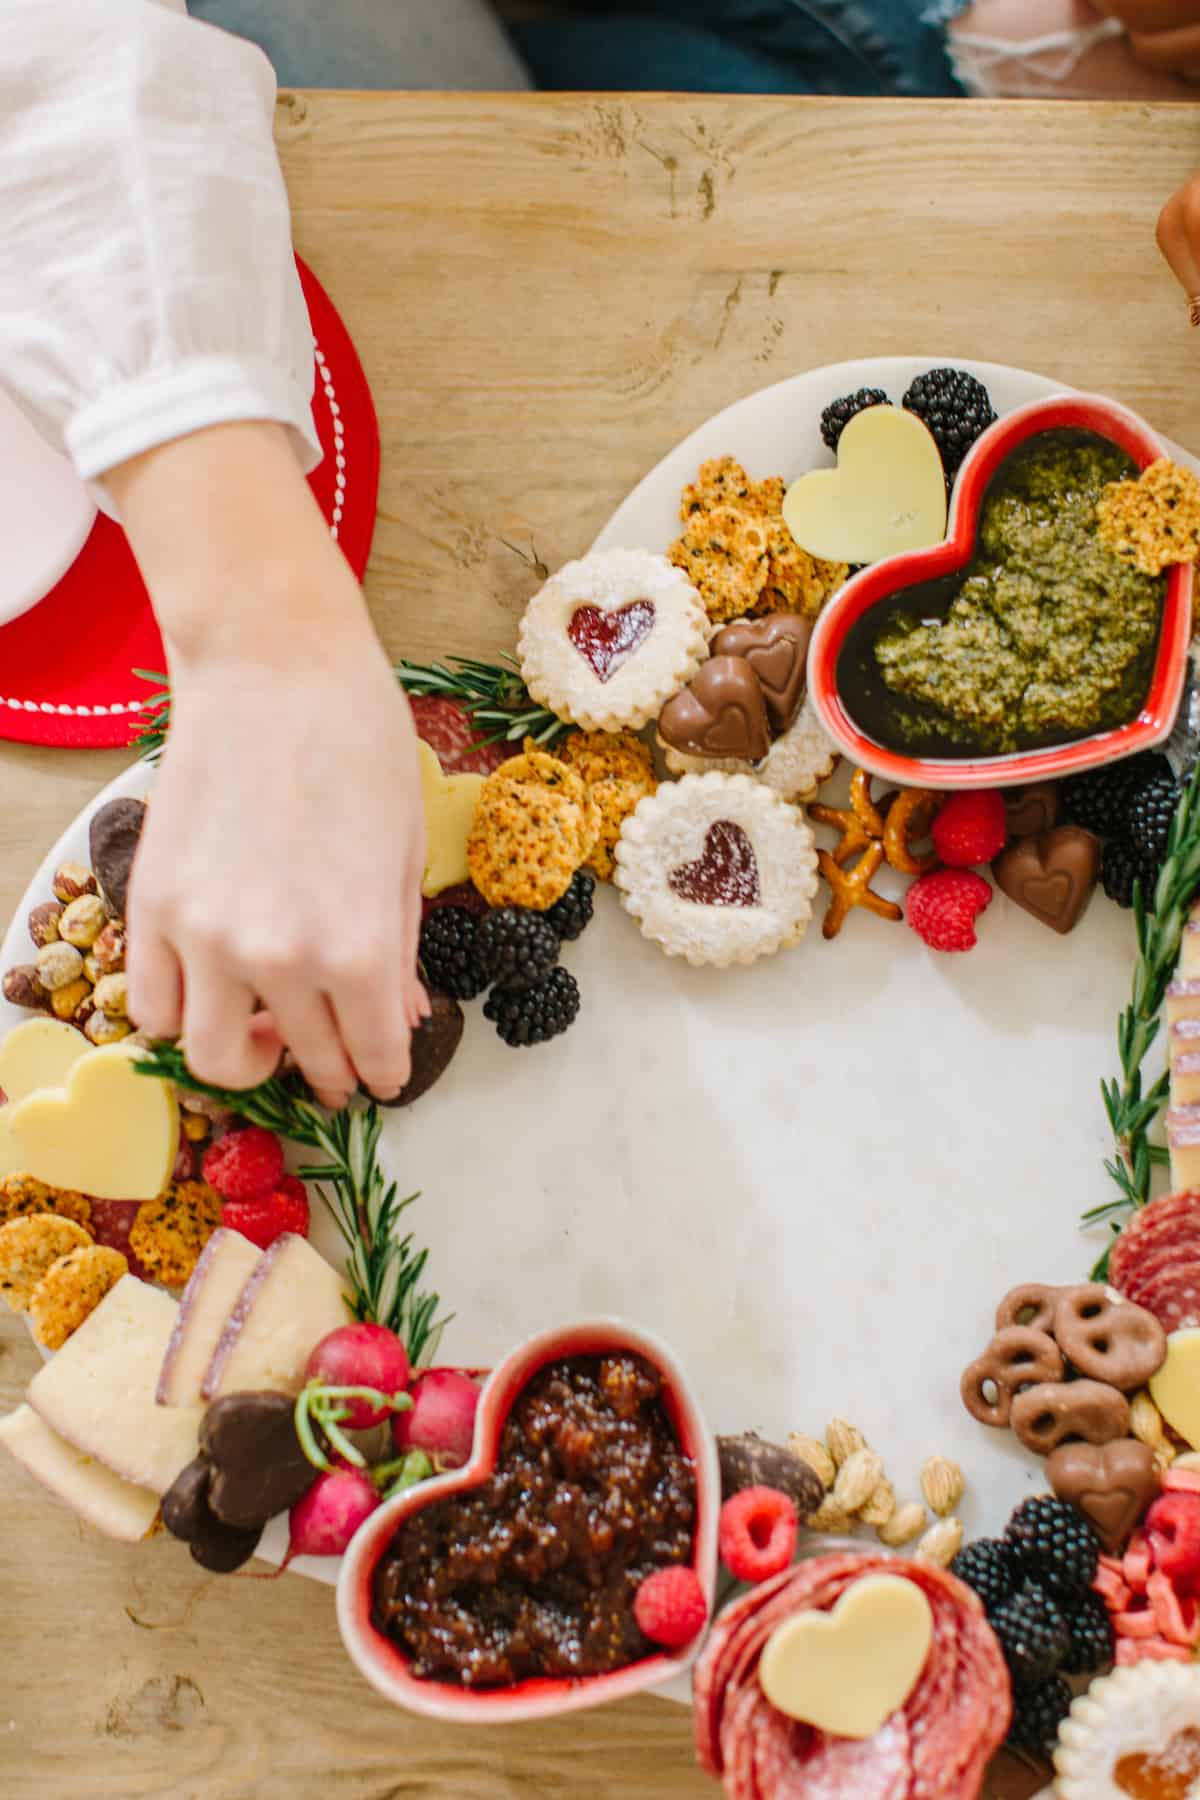 Valentines heart charcuterie board with a hand reaching in for it